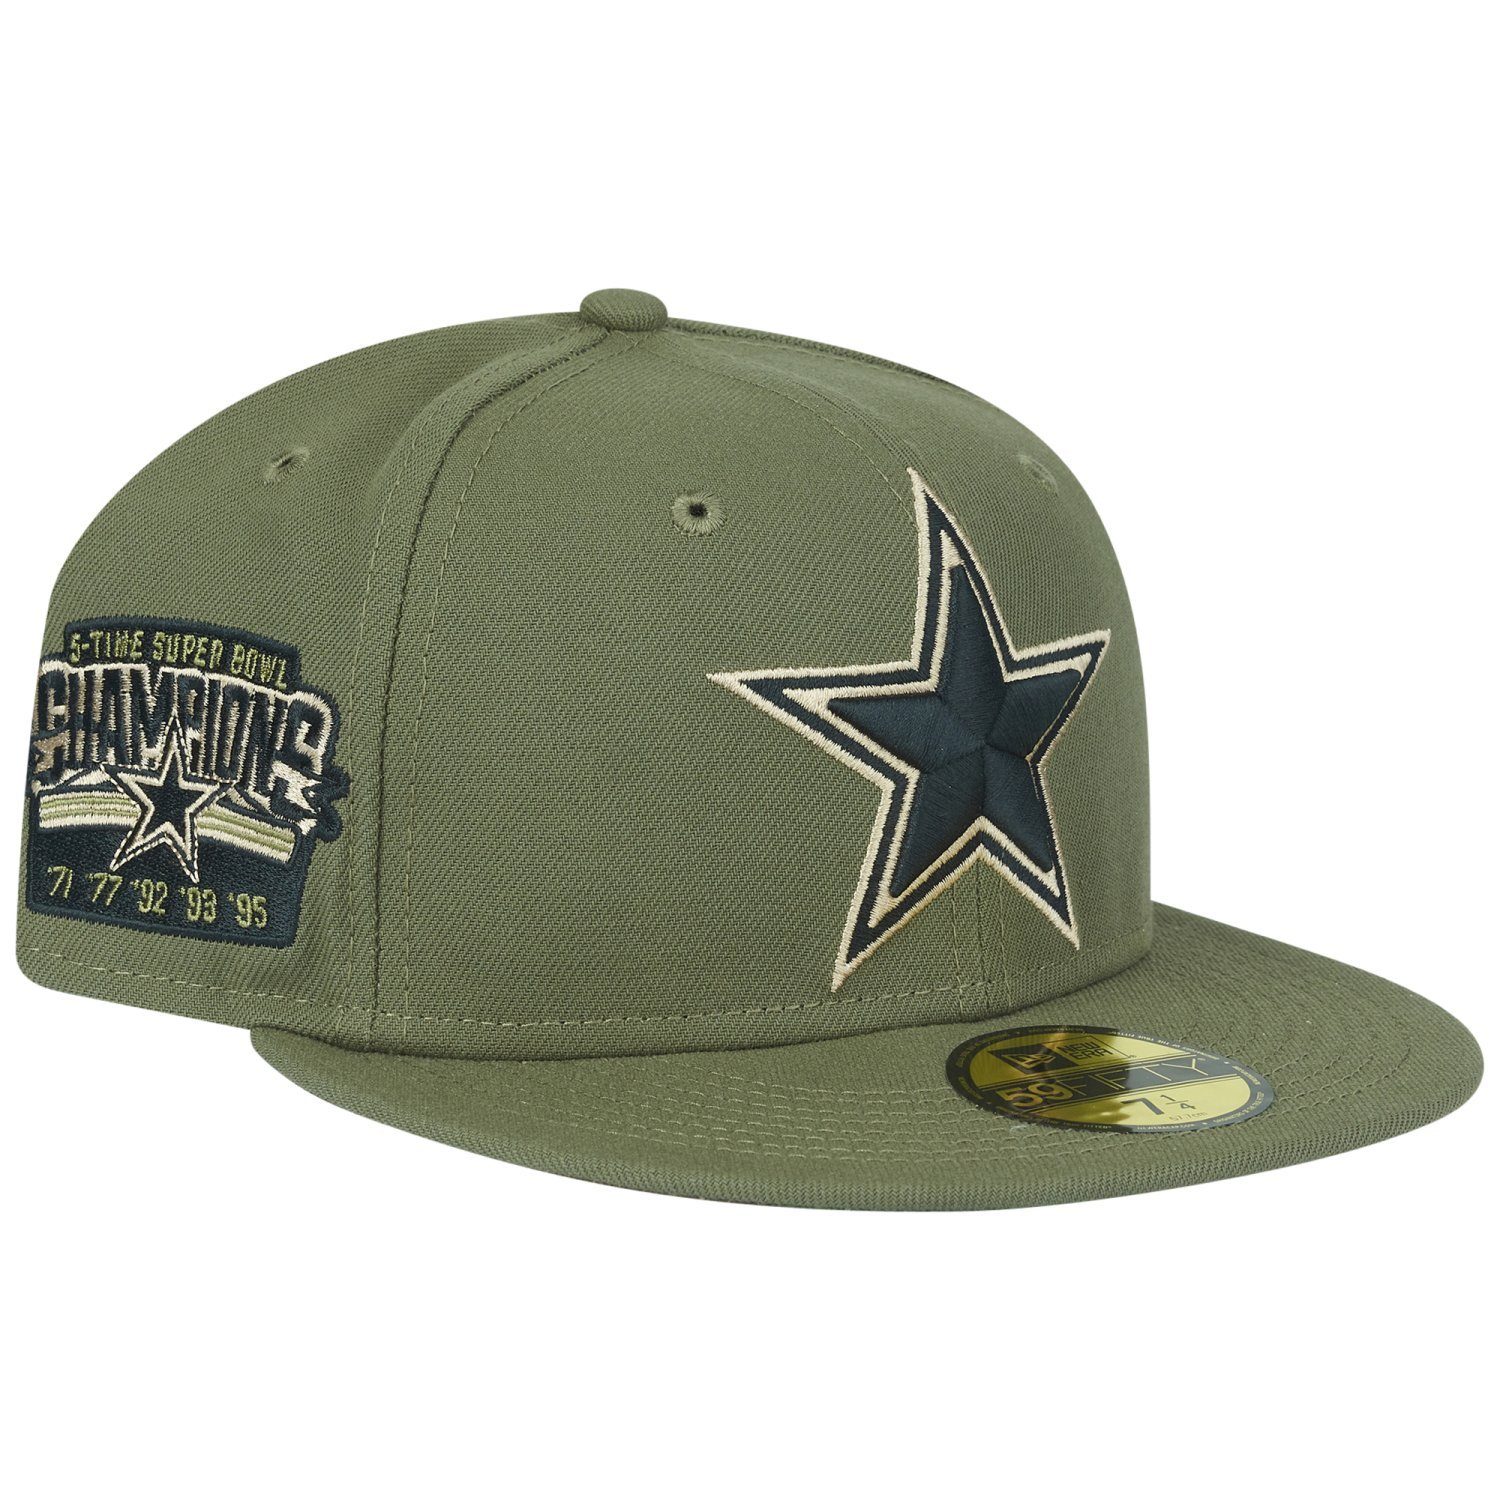 New Era Fitted Cap 59Fifty NFL Throwback Superbowl ProBowl Dallas Cowboys